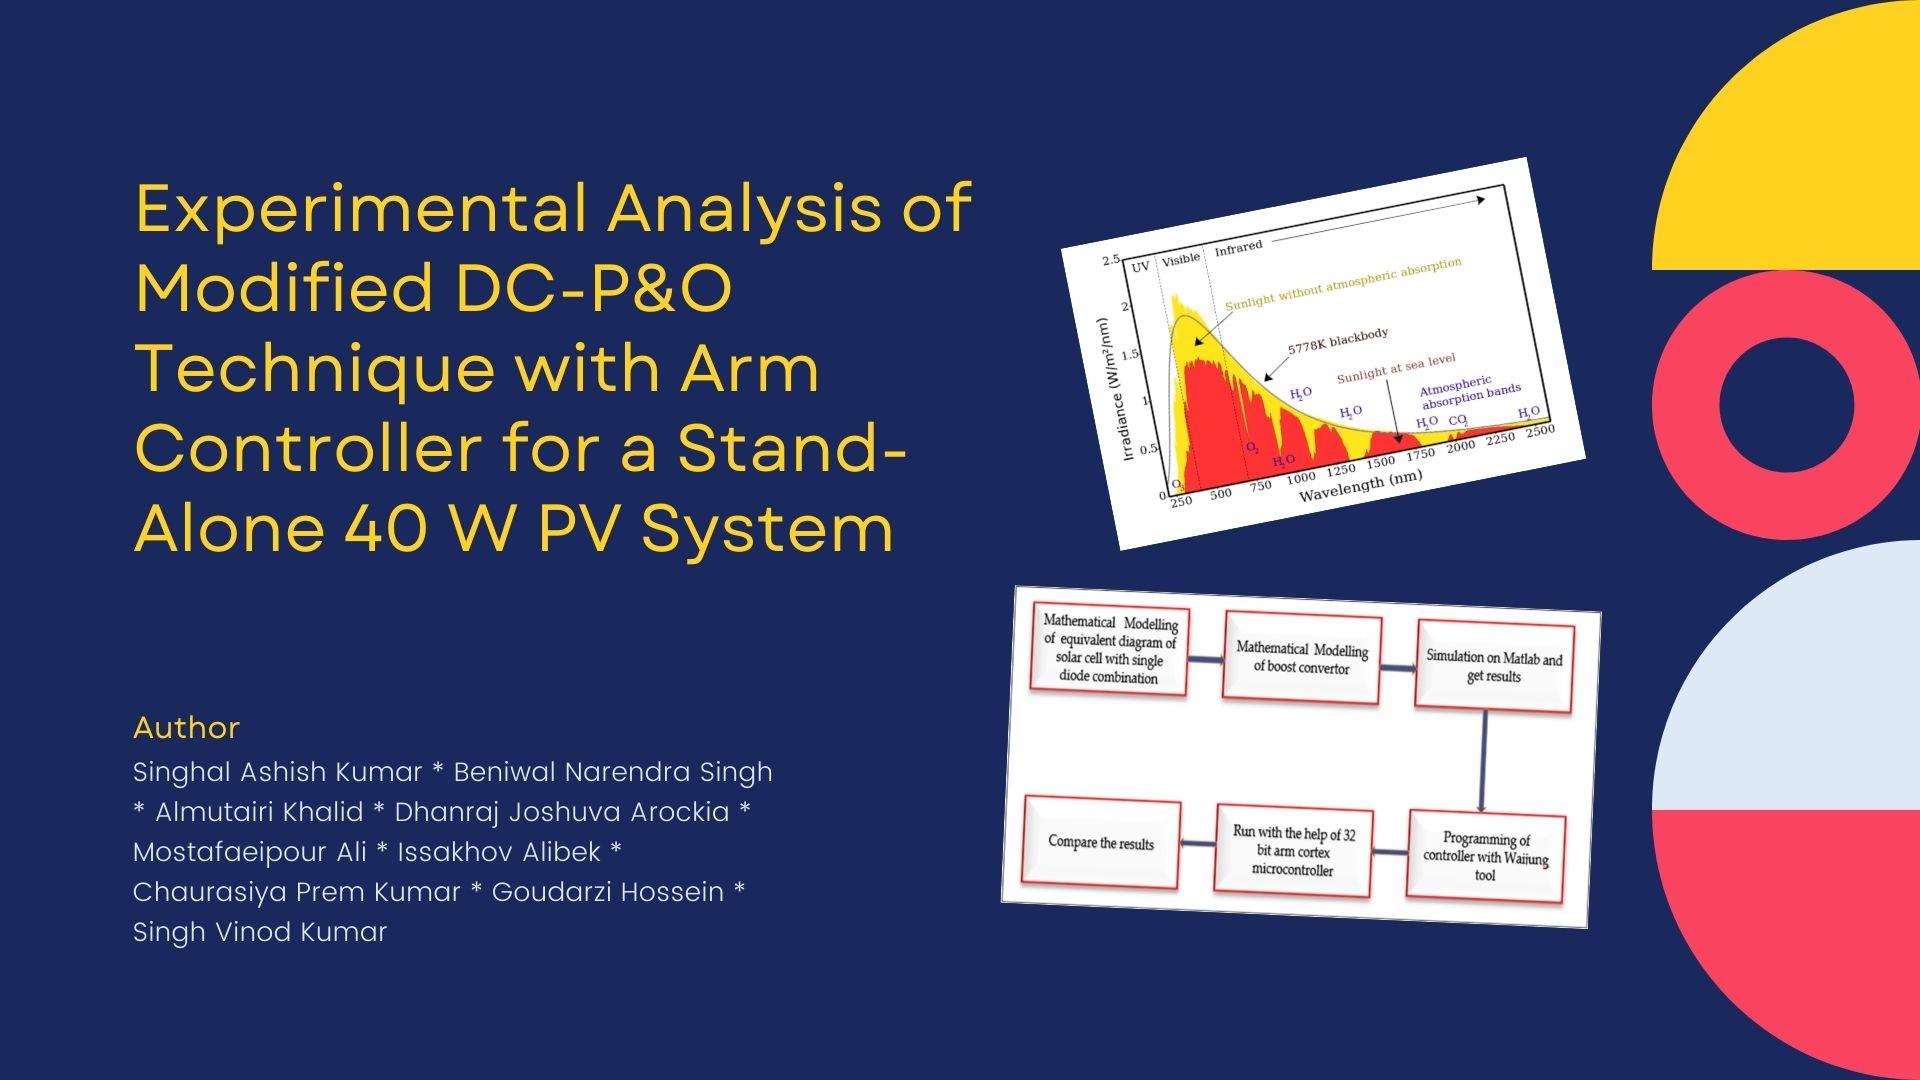 Experimental Analysis of Modified DC-P&O Technique with Arm Controller for a Stand-Alone 40 W PV System